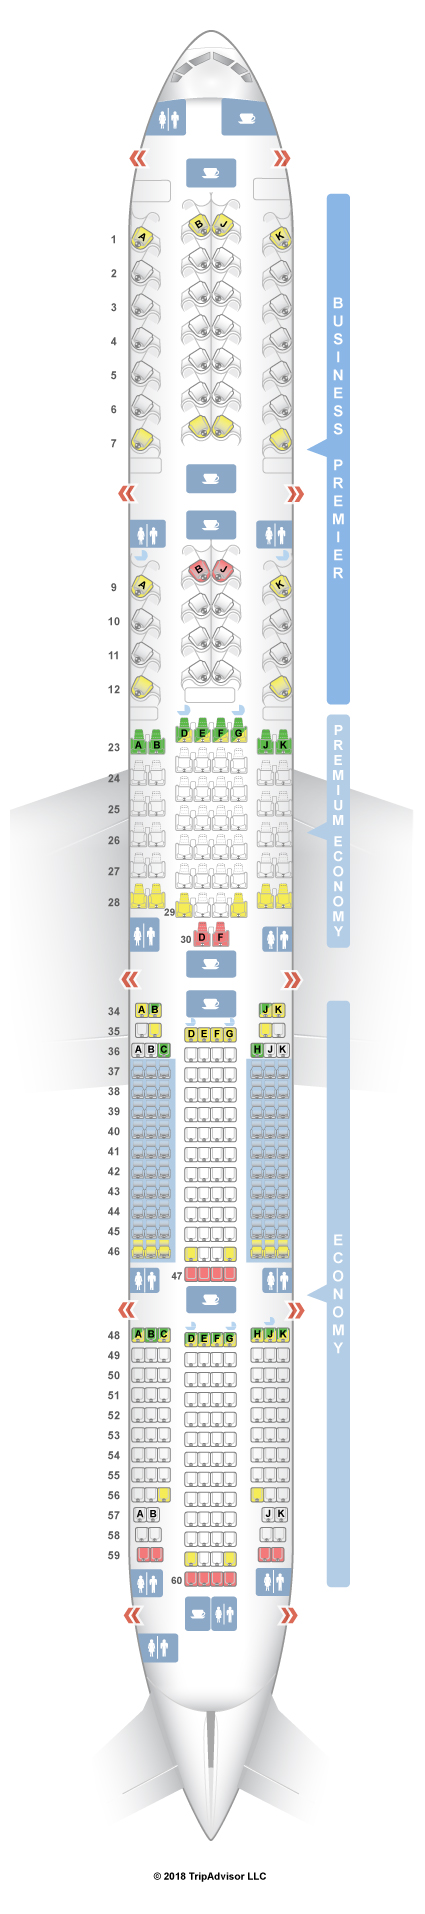 Air New Zealand Boeing 777 Seat Map